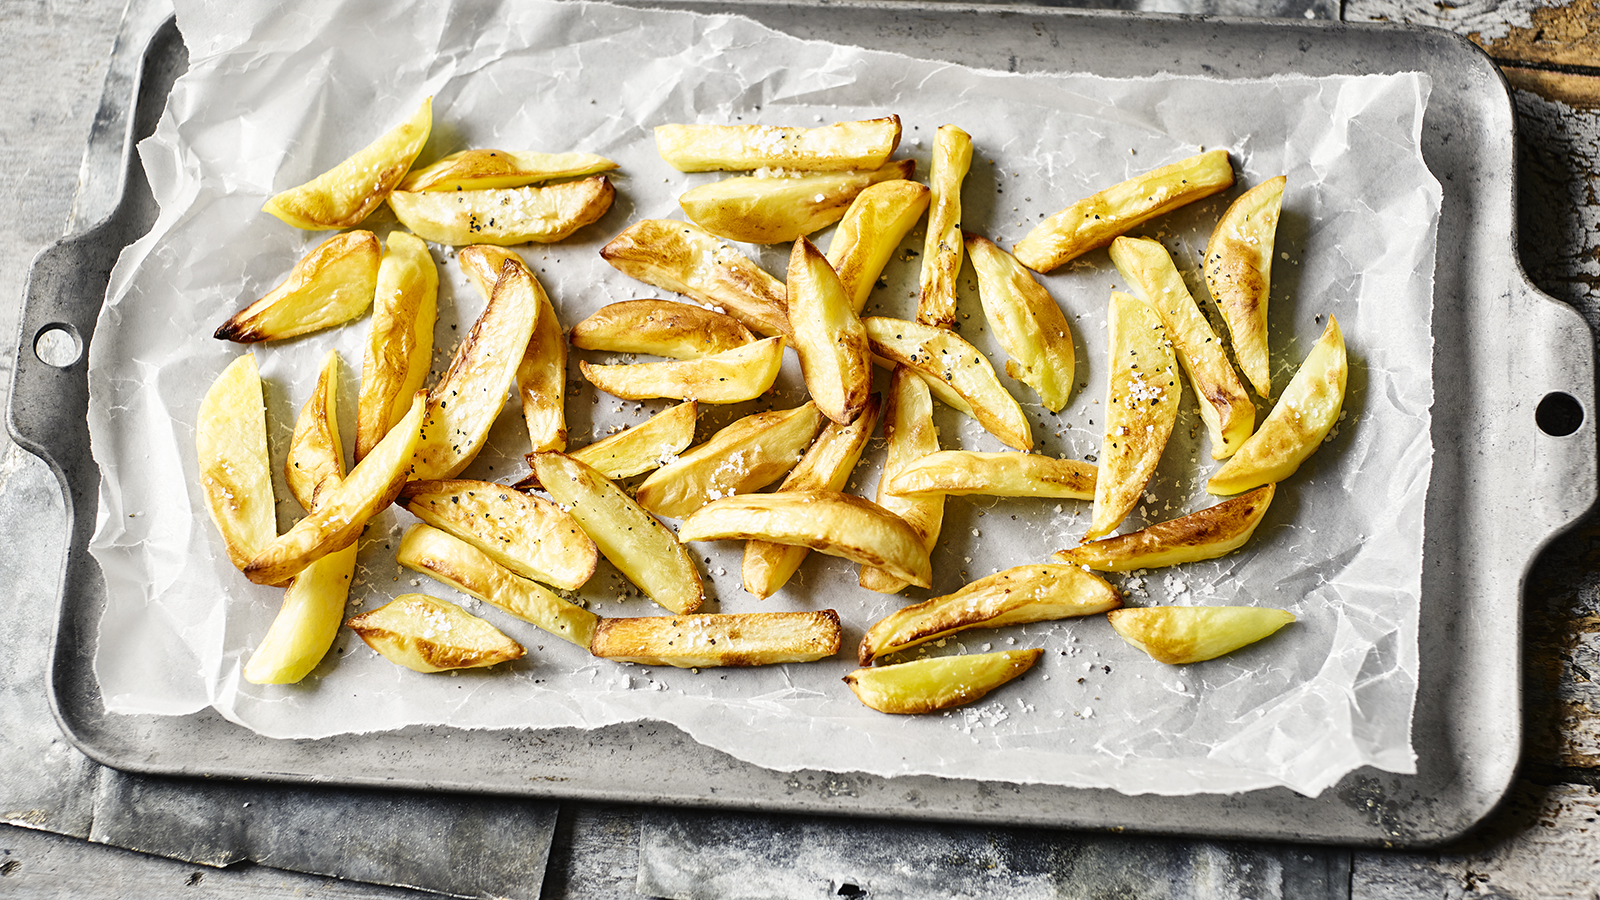 Healthy oven chips